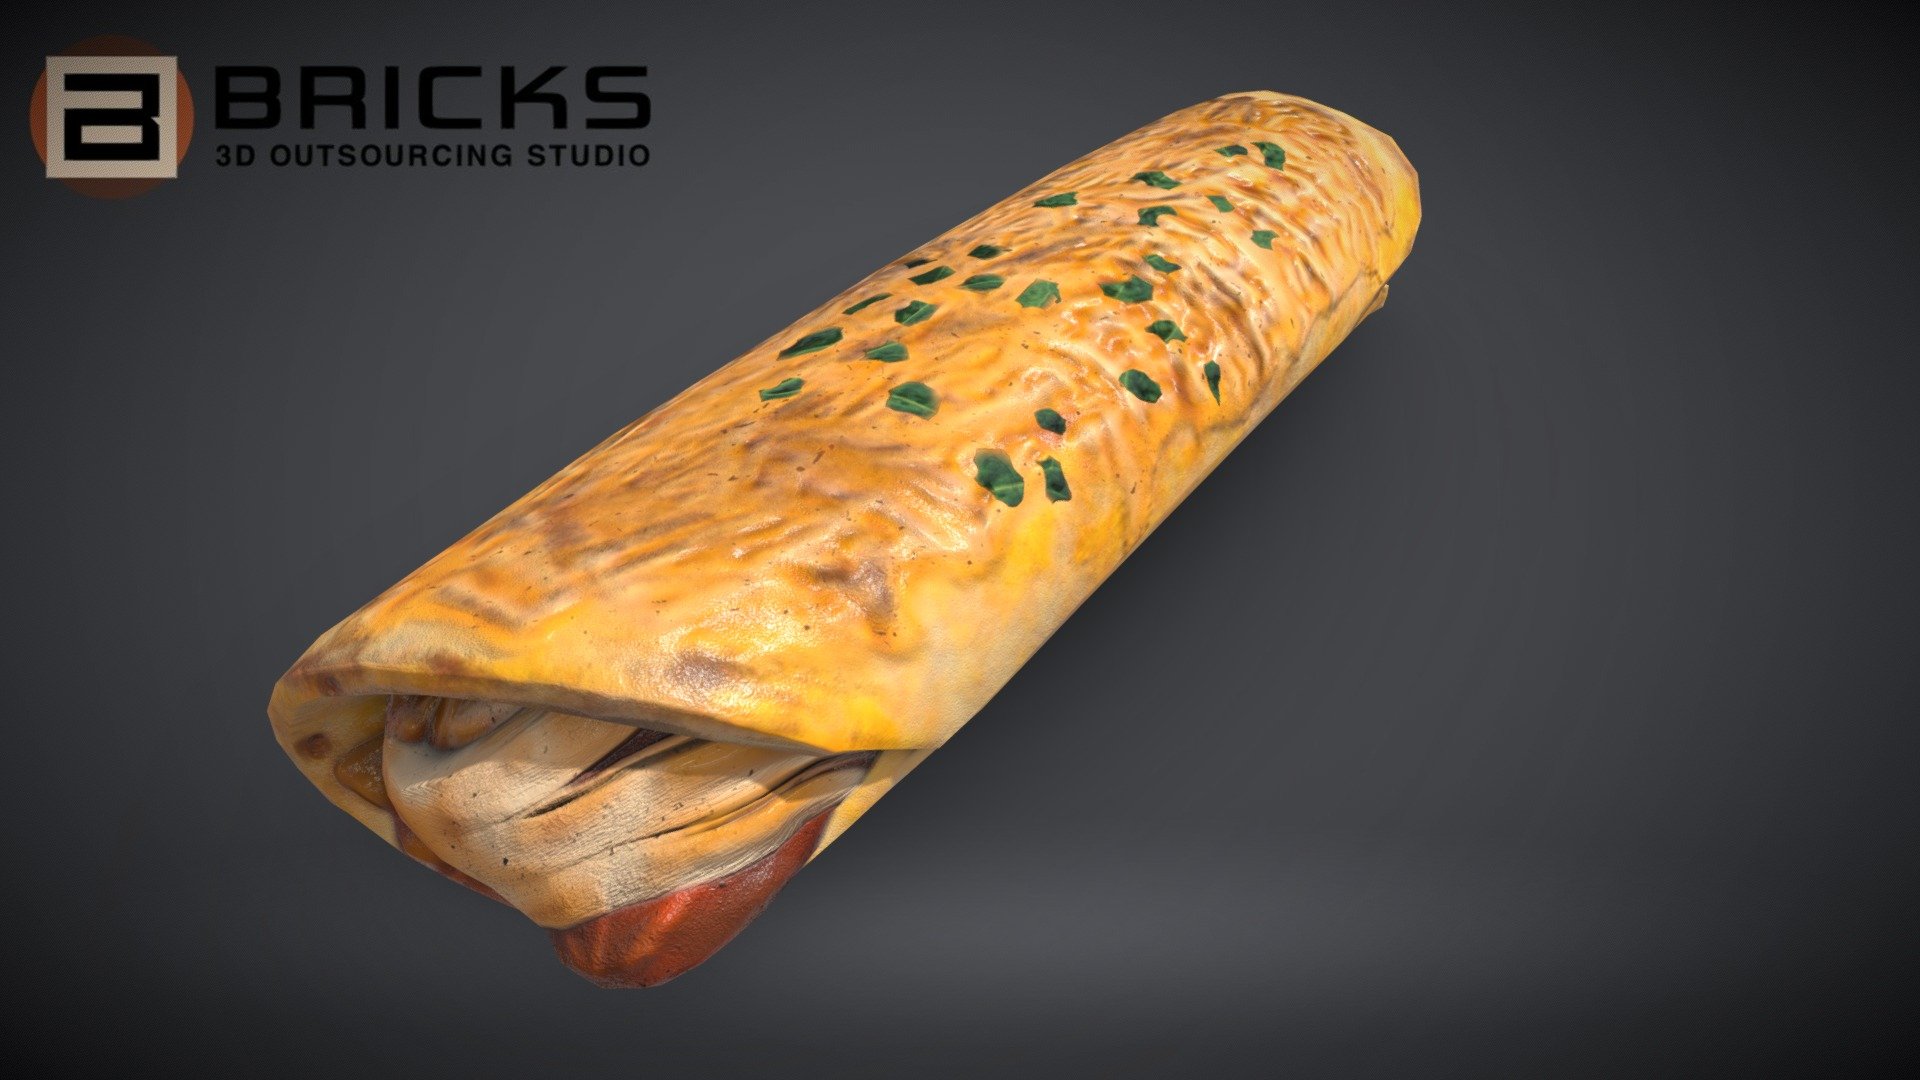 PBR Food Asset:
Chicken Enchilada
Polycount: 962
Vertex count: 571
Texture Size: 2048px x 2048px
Normal: OpenGL

If you need any adjust in file please contact us: team@bricks3dstudio.com

Hire us: tringuyen@bricks3dstudio.com
Here is us: https://www.bricks3dstudio.com/
        https://www.artstation.com/bricksstudio
        https://www.facebook.com/Bricks3dstudio/
        https://www.linkedin.com/in/bricks-studio-b10462252/ - Chicken Enchilada - Buy Royalty Free 3D model by Bricks Studio (@bricks3dstudio) 3d model